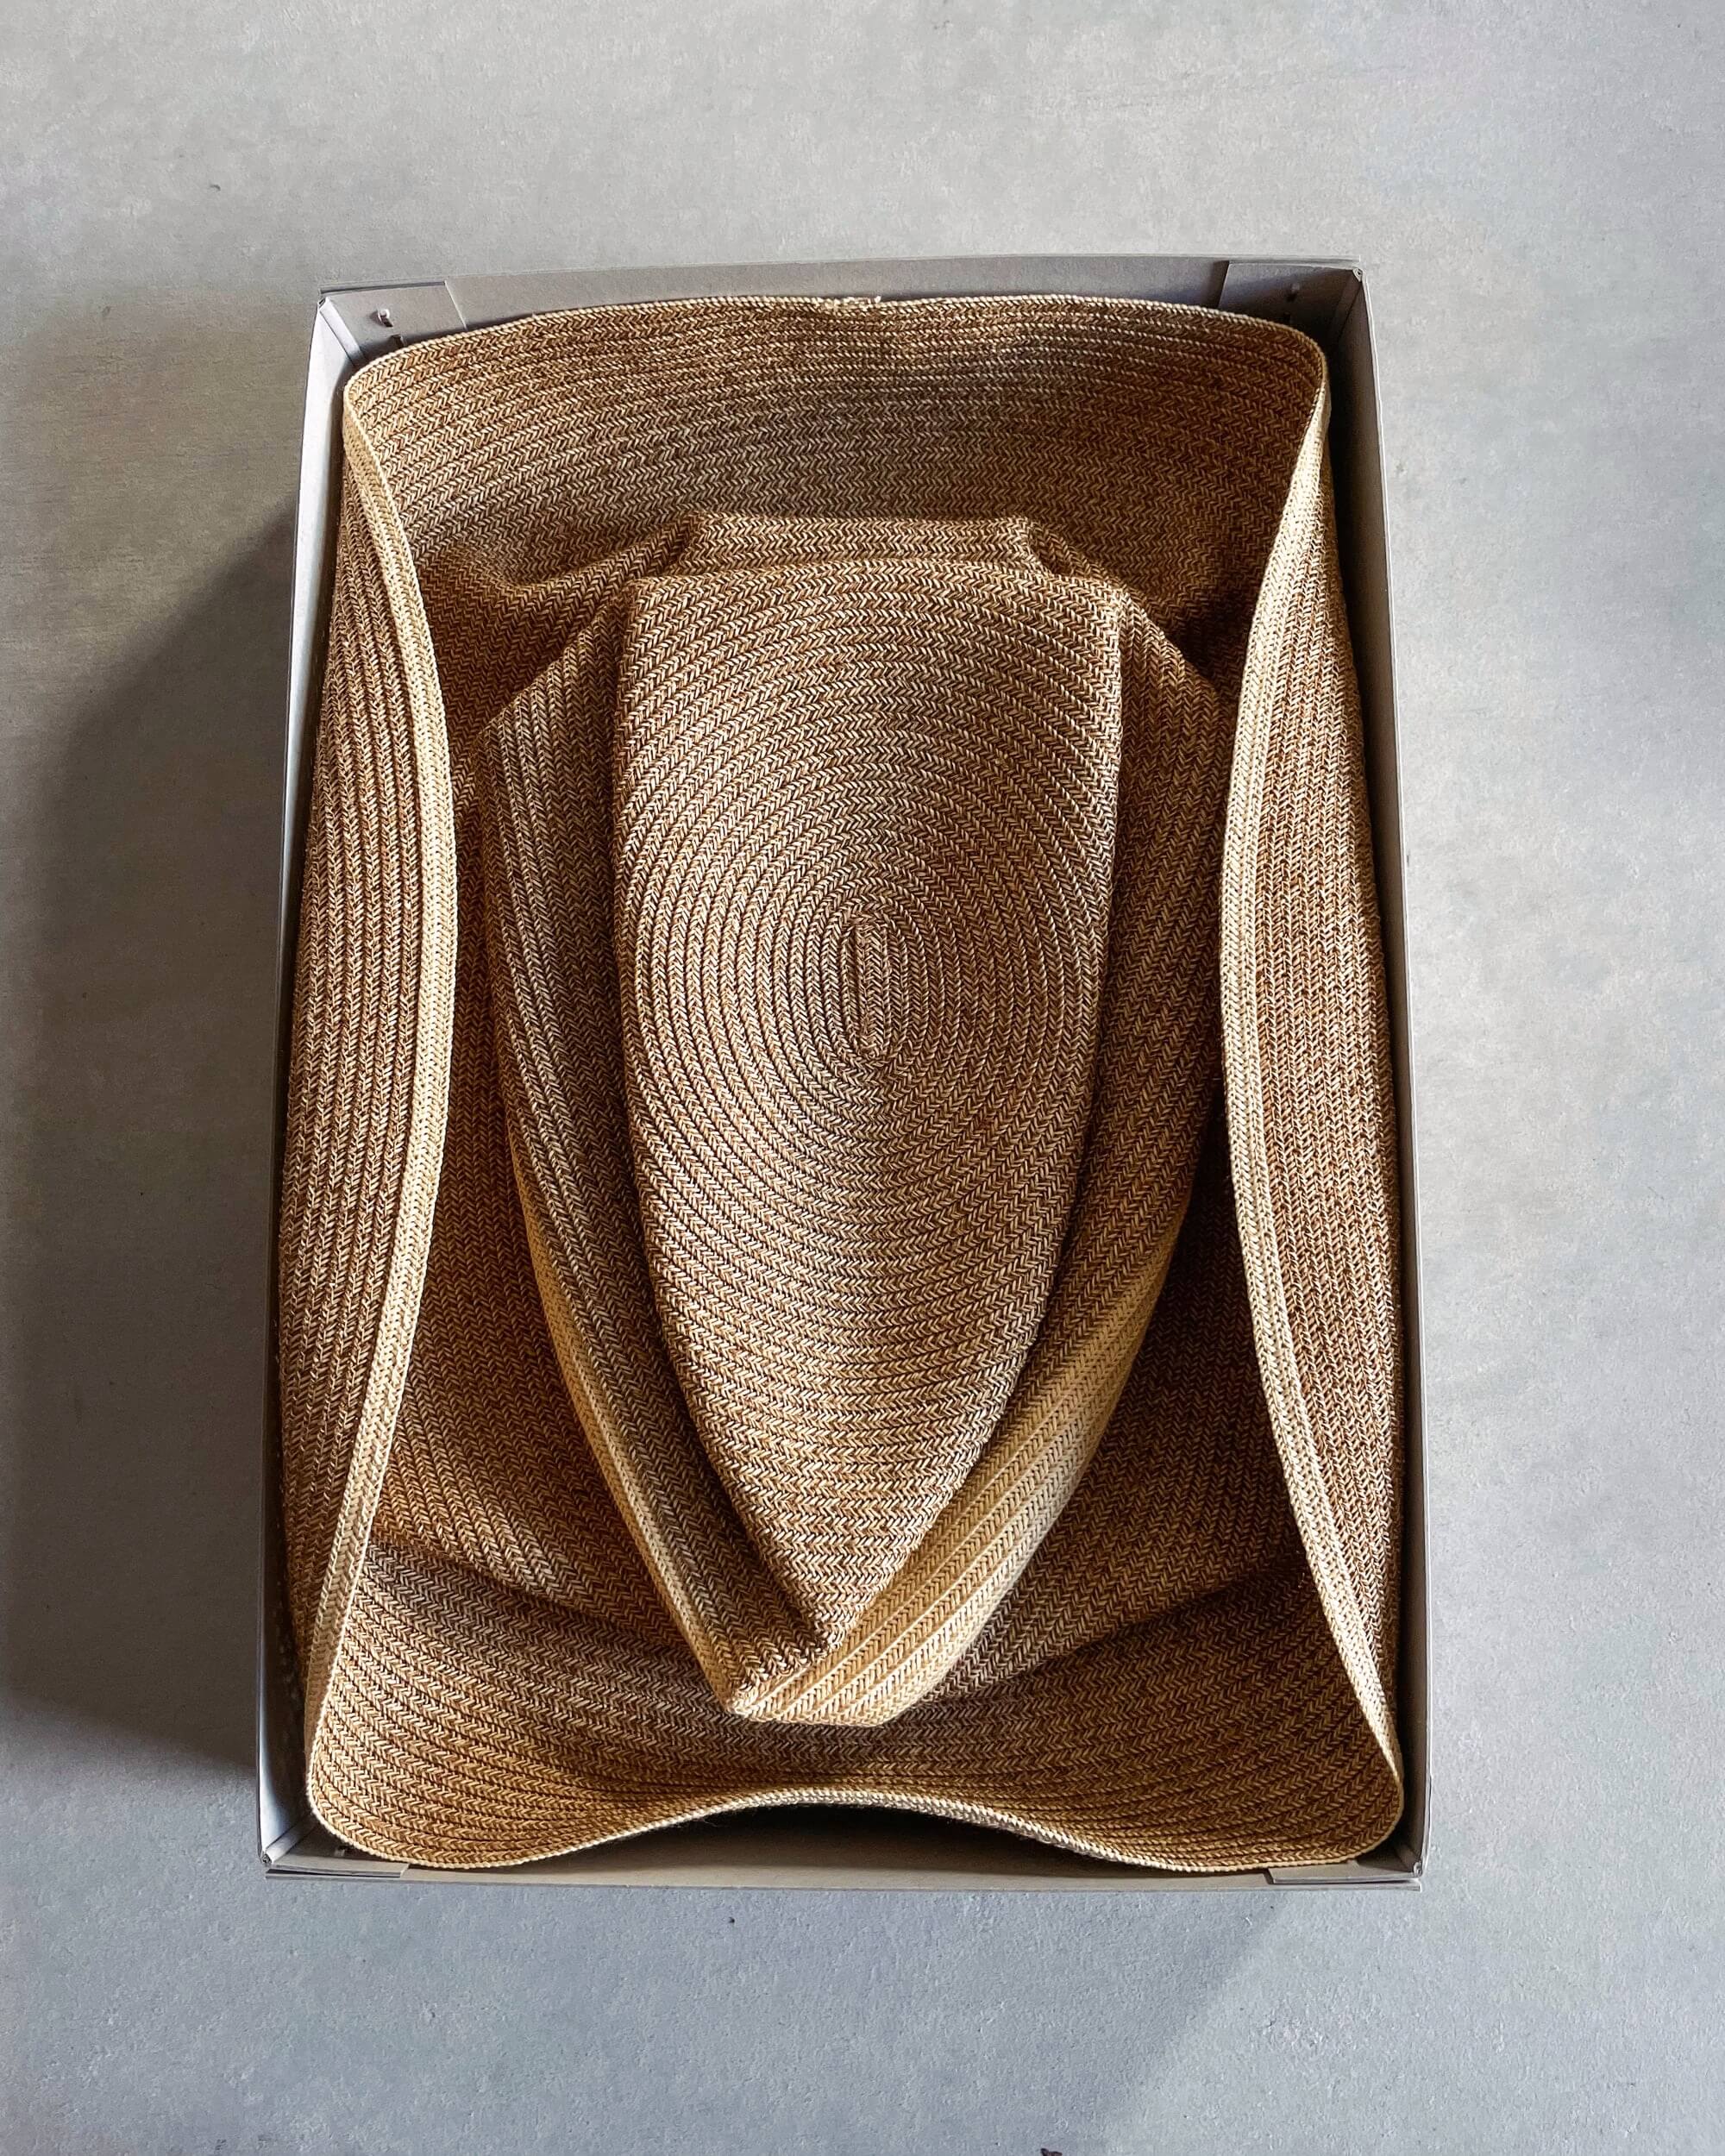 mature ha : boxed hat with barley stripe